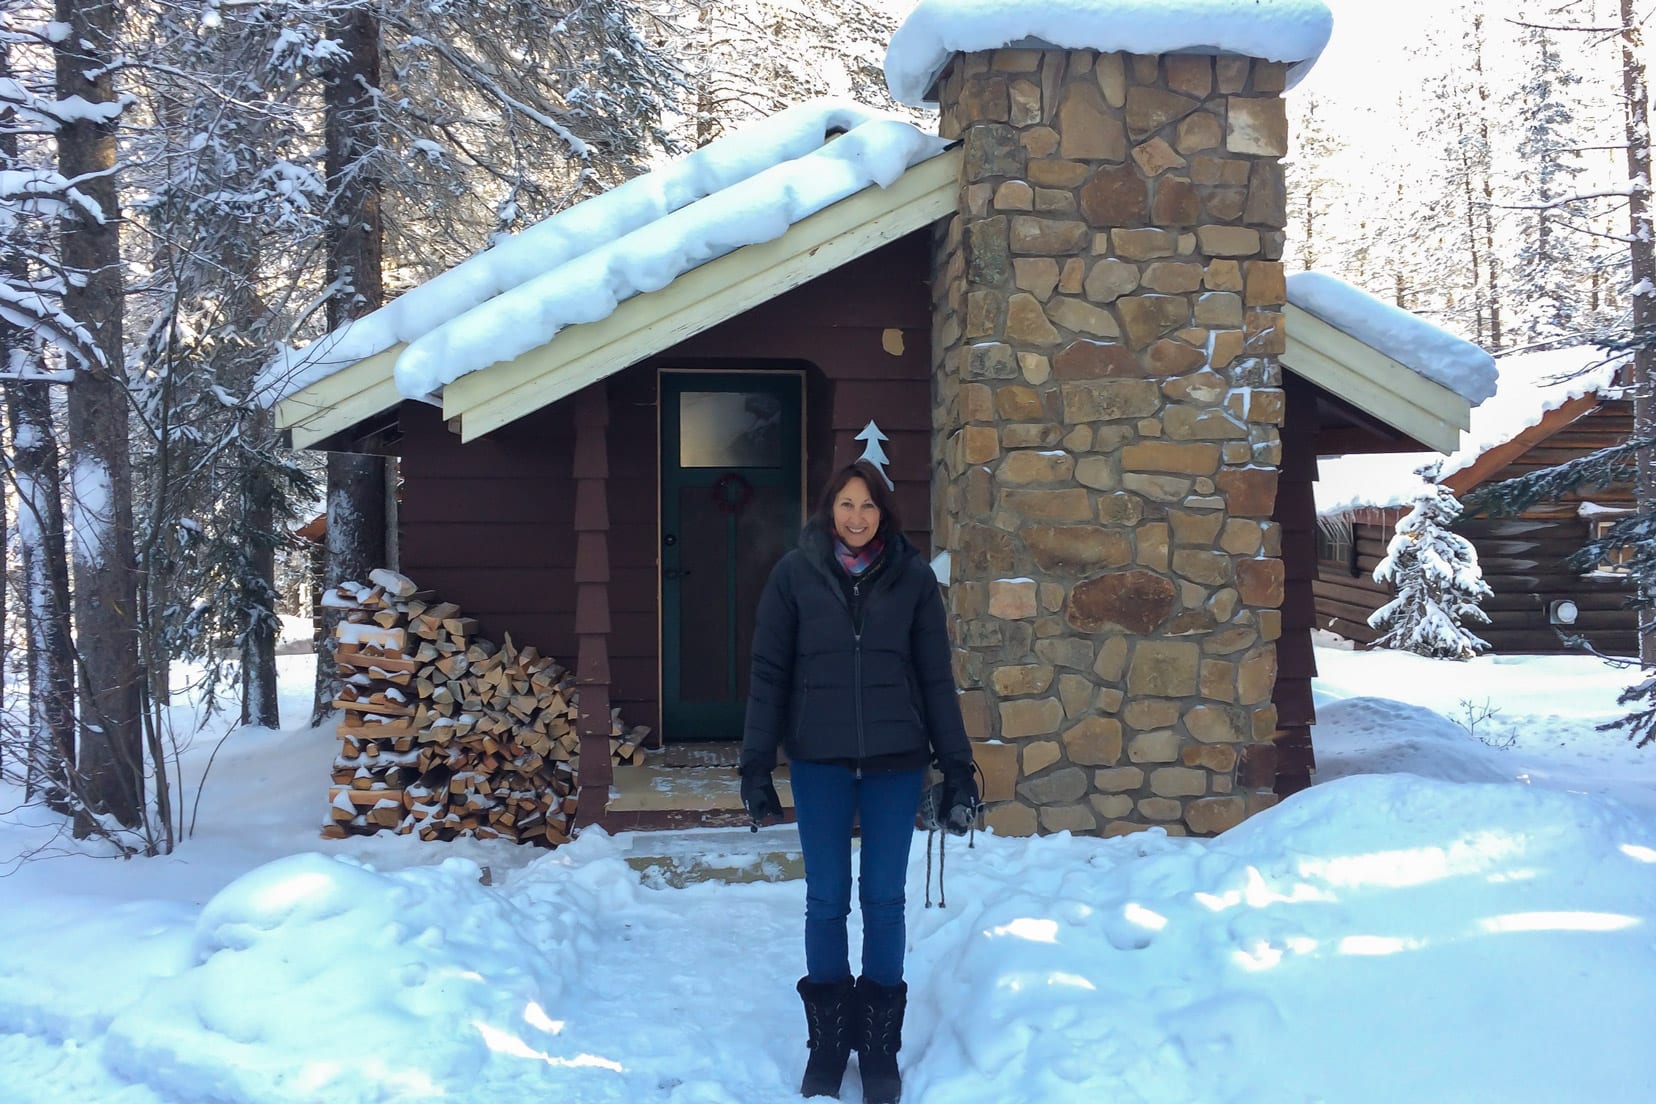 Shelley stood by log cabin in Banff at Christmas